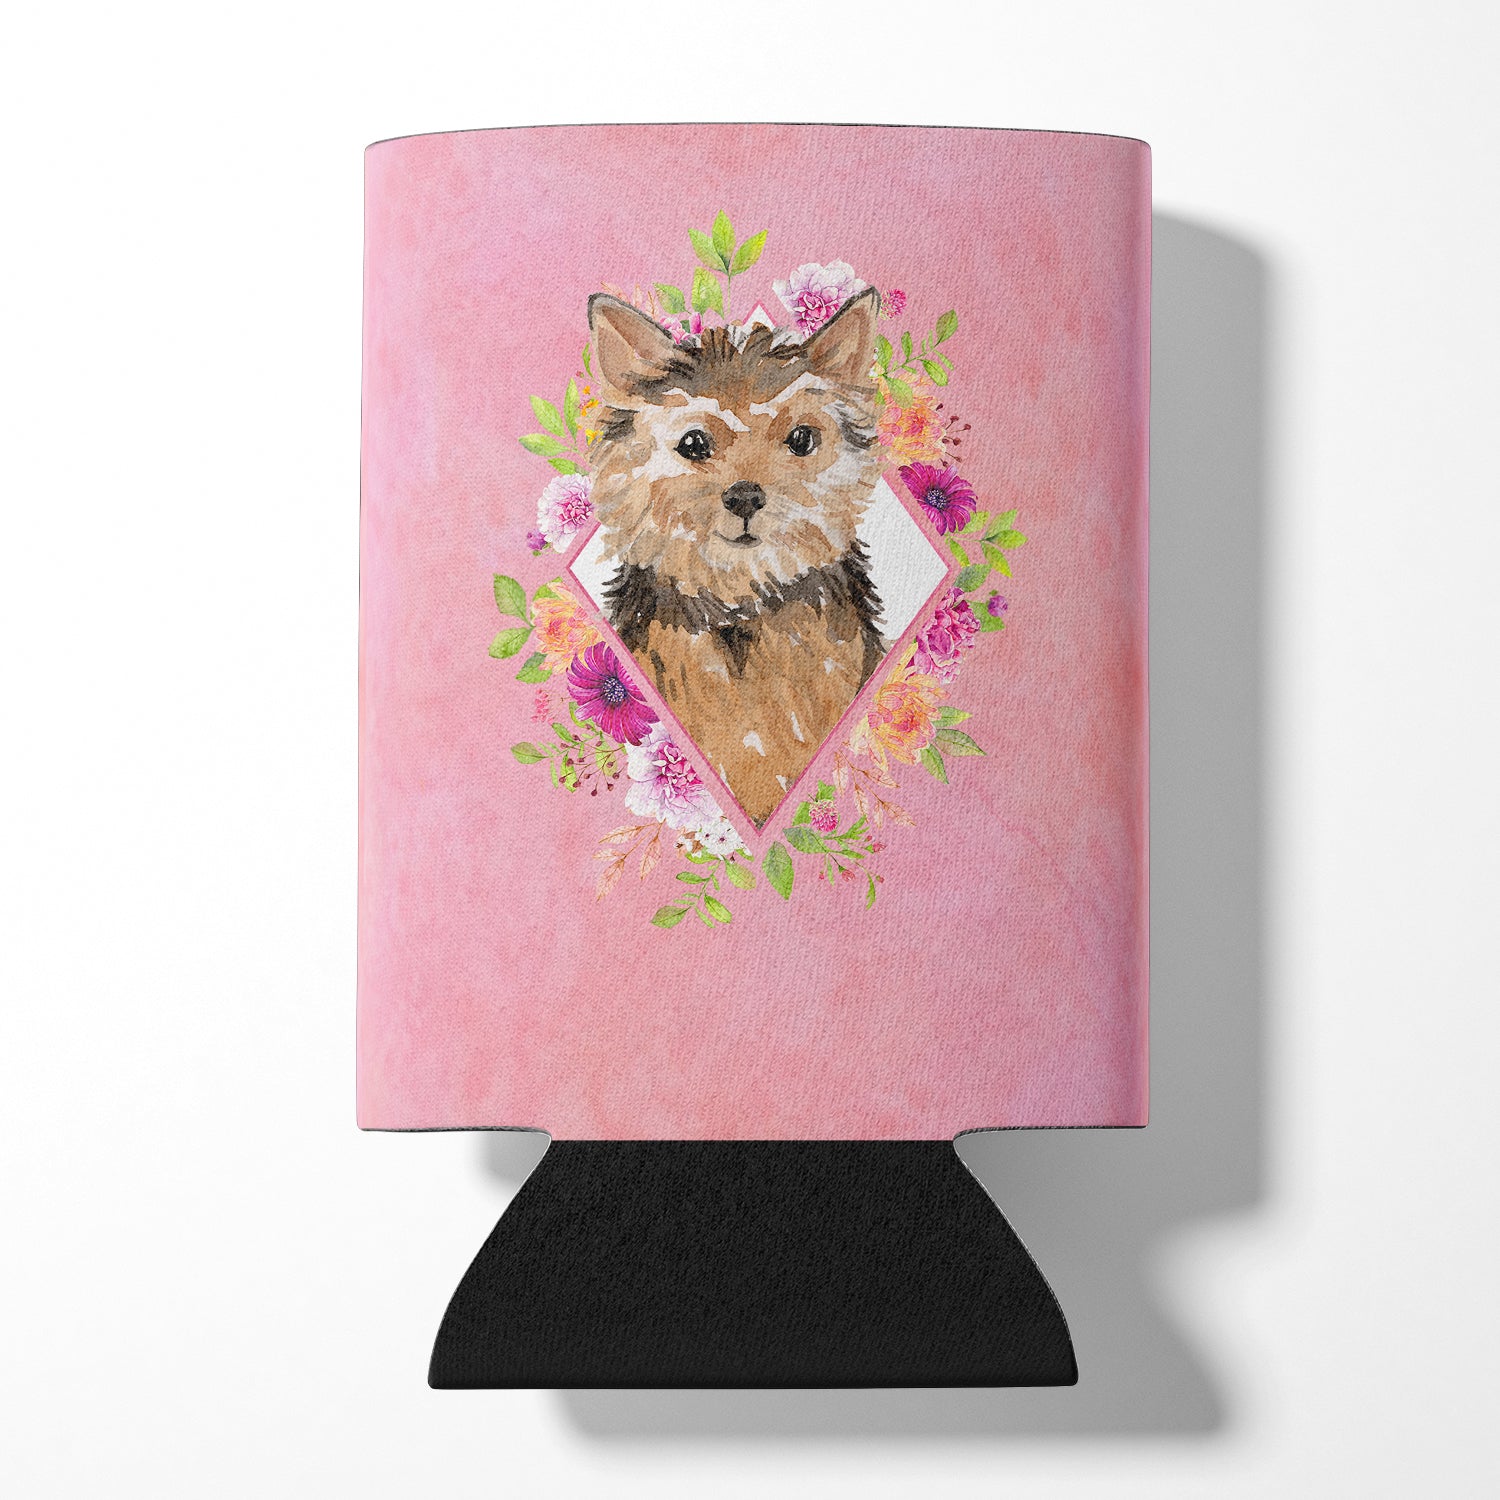 Norwich Terrier Pink Flowers Can or Bottle Hugger CK4220CC  the-store.com.